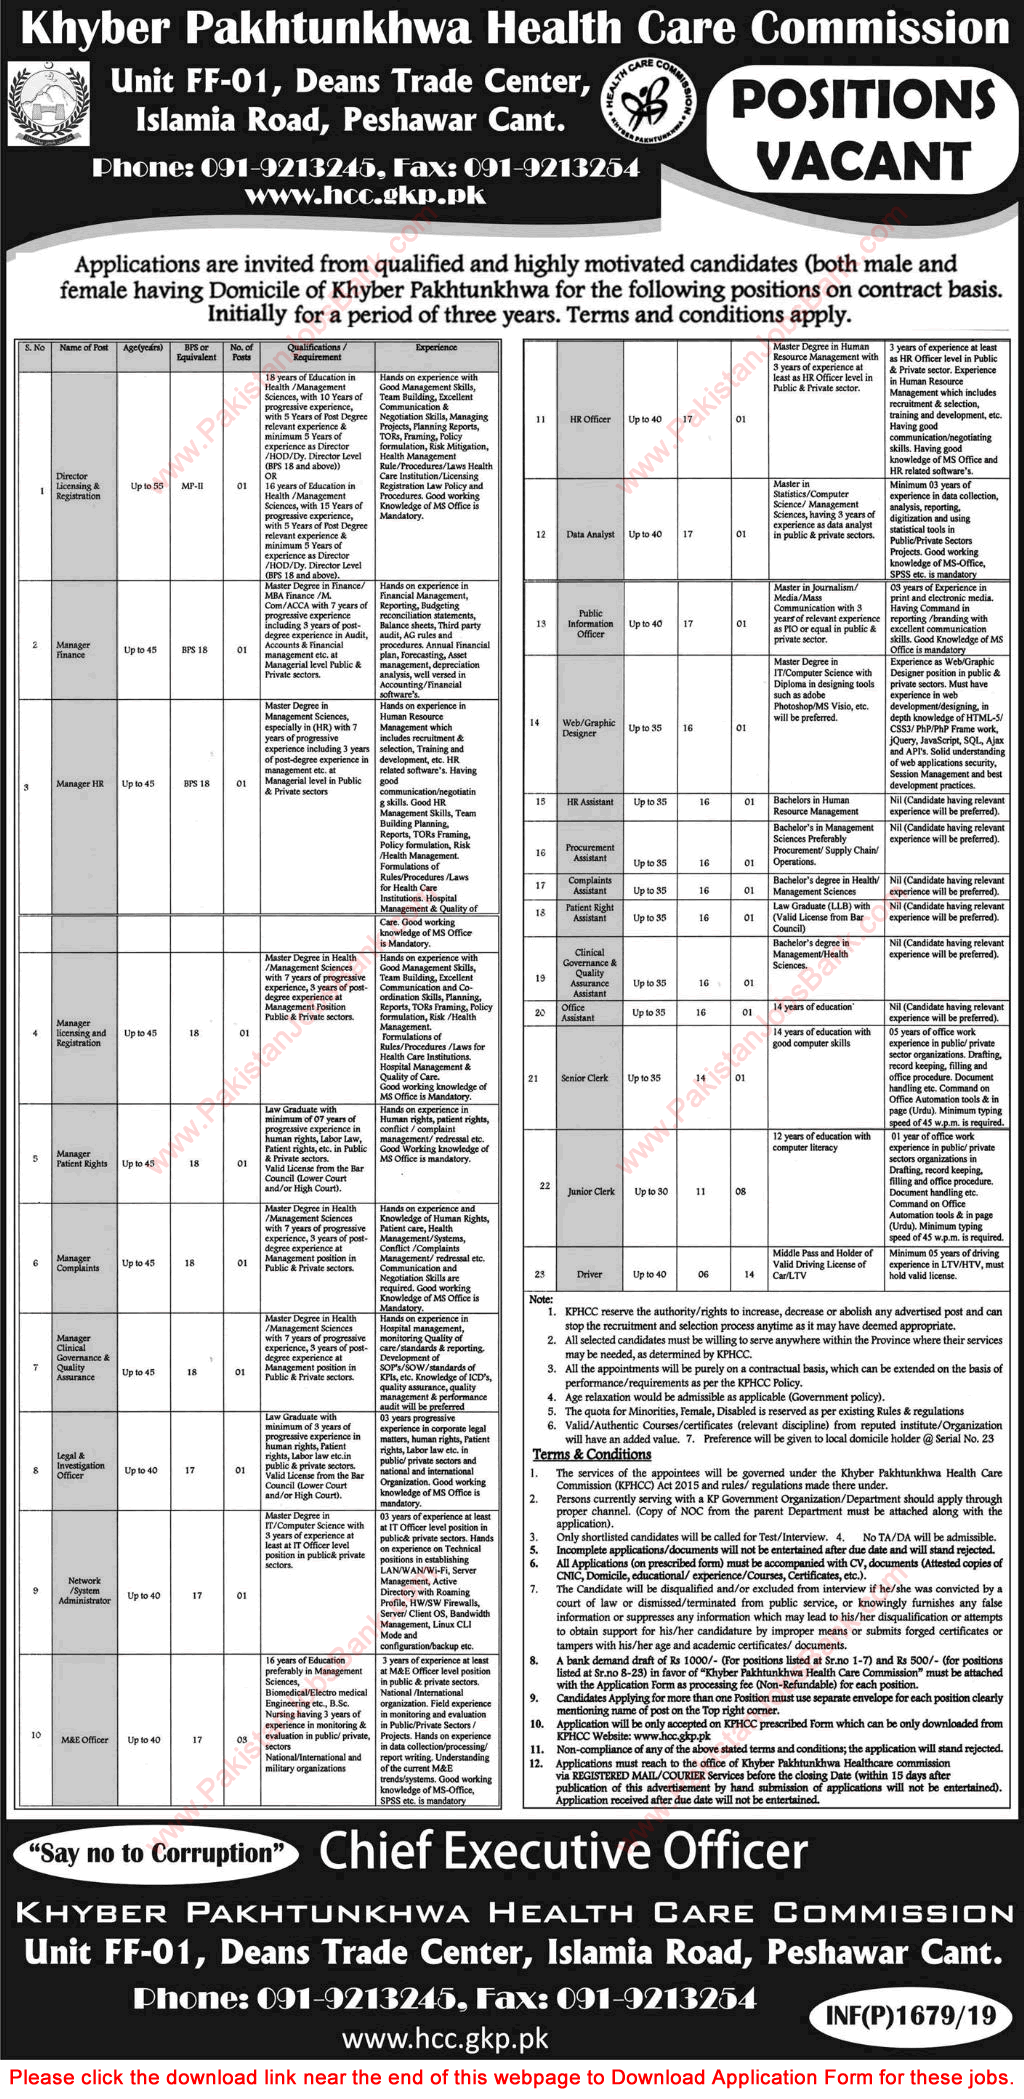 Khyber Pakhtunkhwa Healthcare Commission Jobs 2019 April Application Form Drivers, Clerks & Others Latest